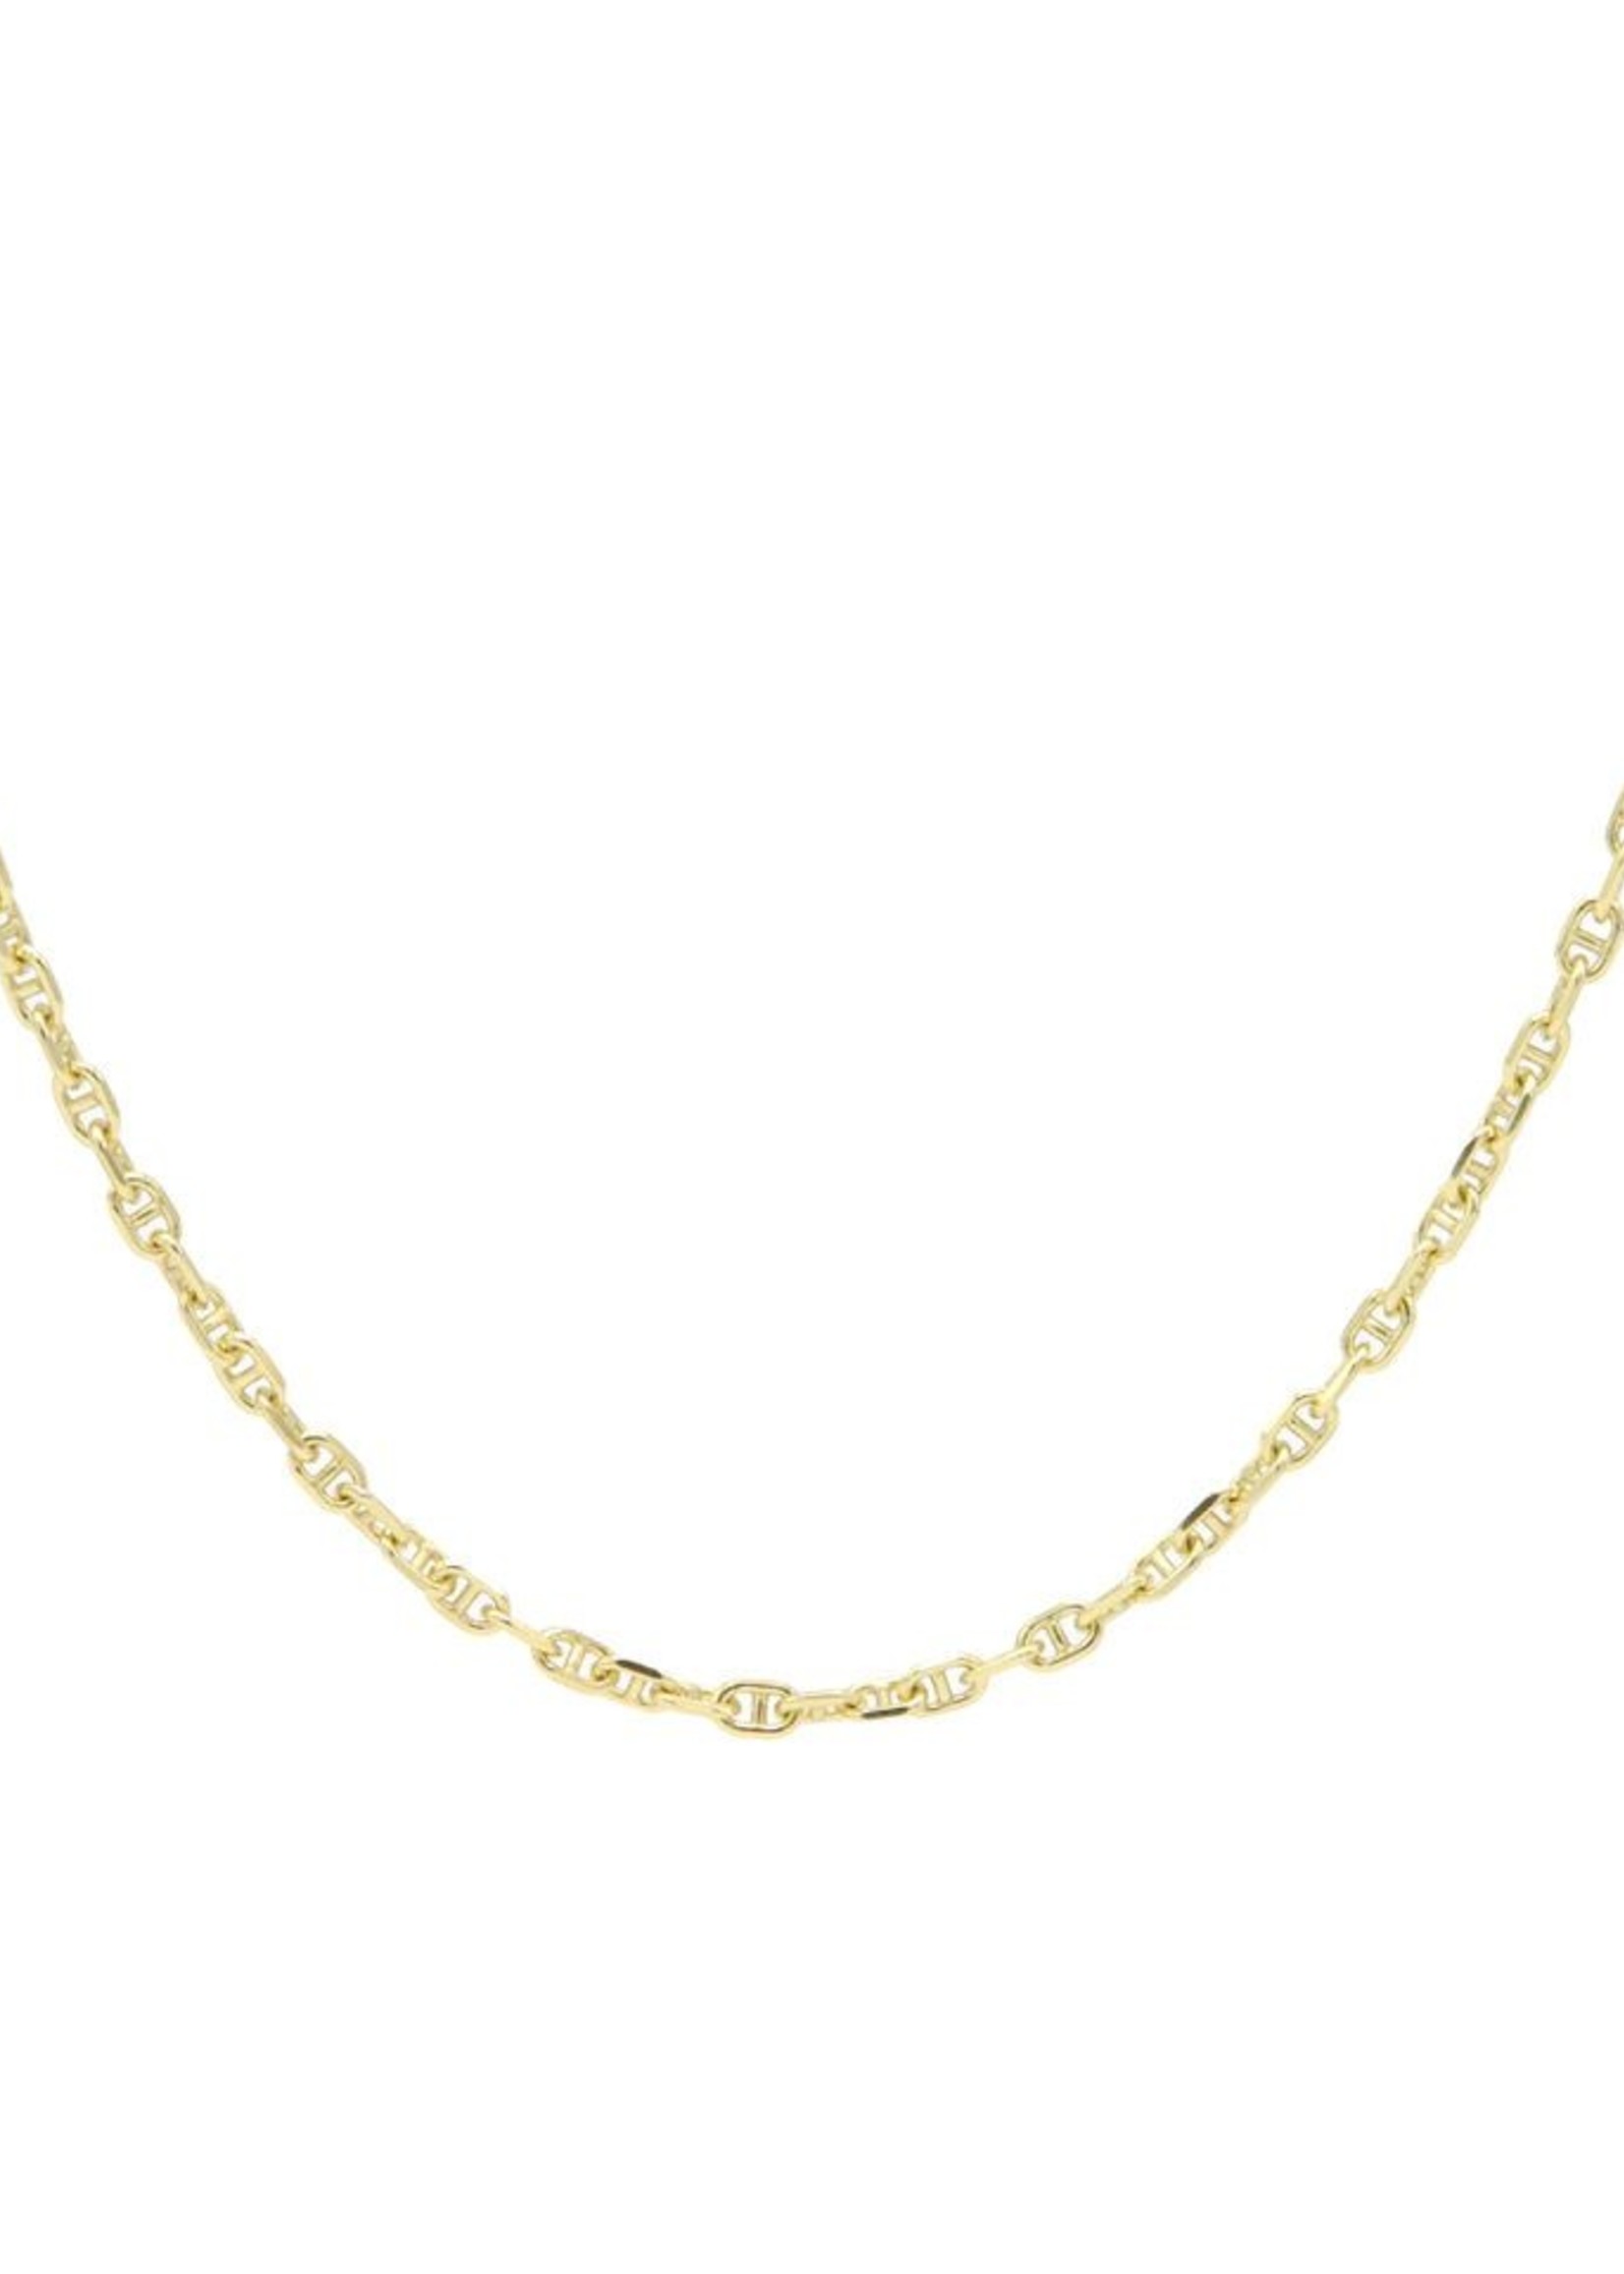 Karma Necklace Queens Chain Diamond Goldplated